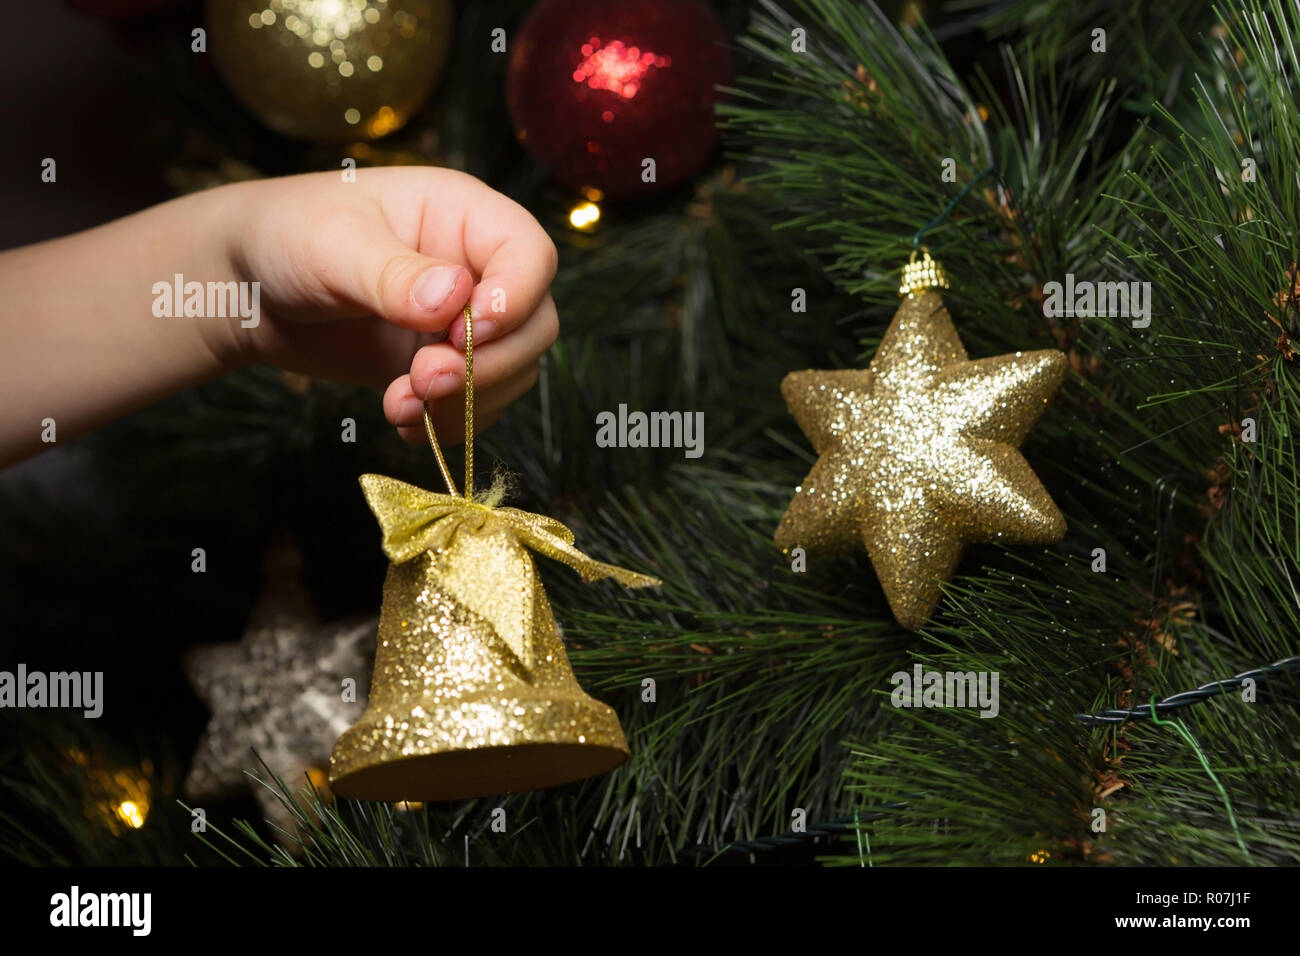 Close-up of Childâ€™s Hand Putting a Christmas Ornament on the Tree Stock Photo